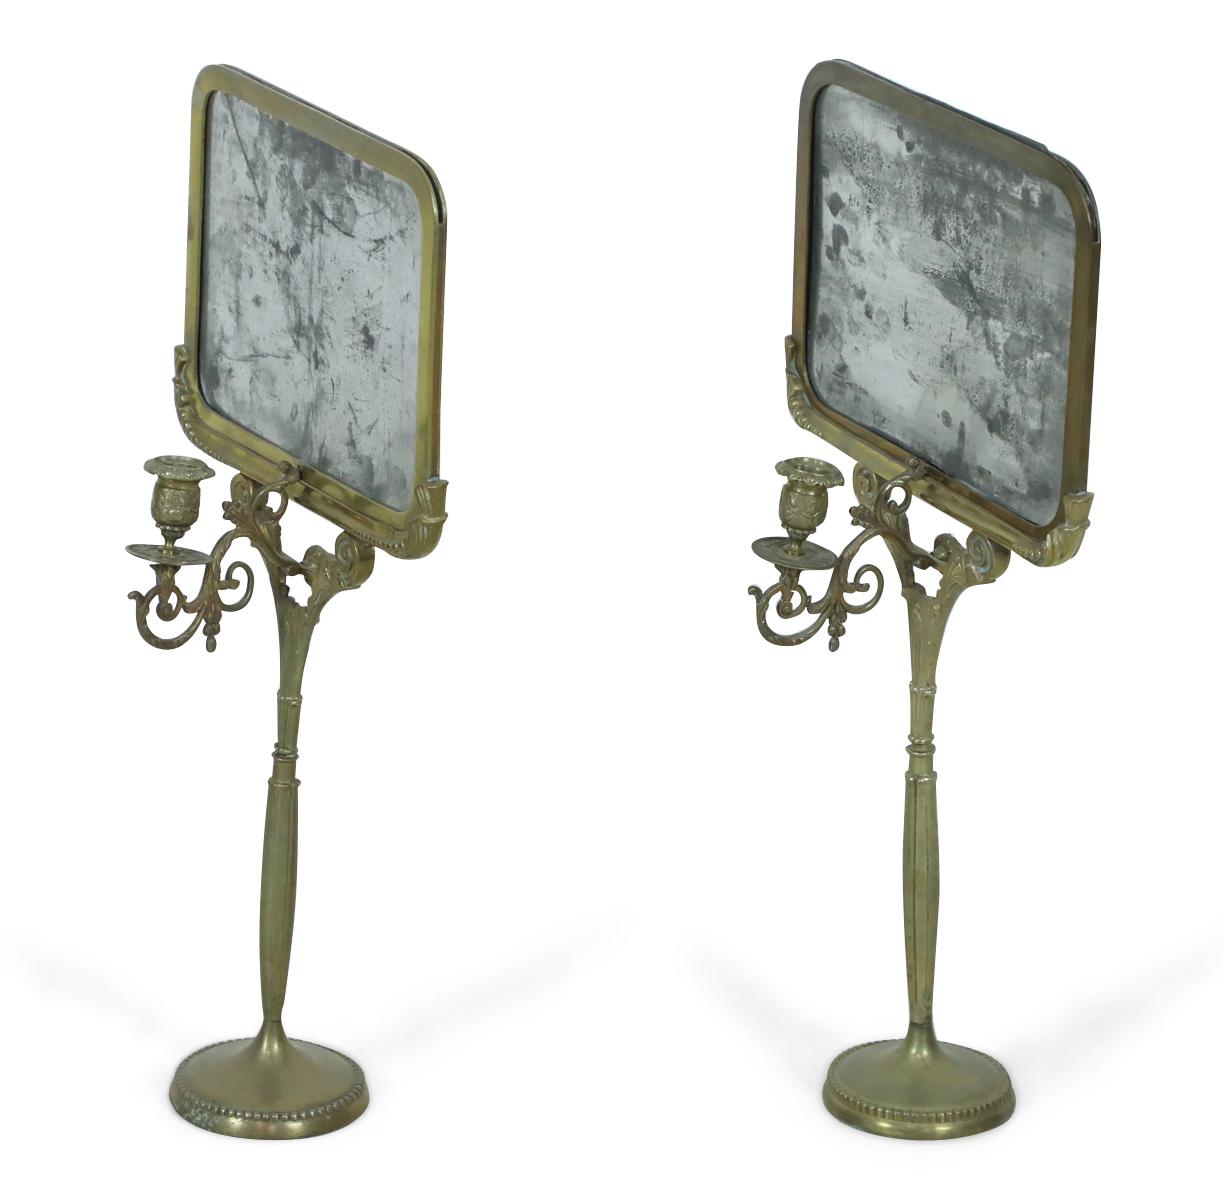 Pair of English Regency-style (19th century) bronze reflector candlestick holders with scroll design arm and round beaded base (Priced as pair).
 